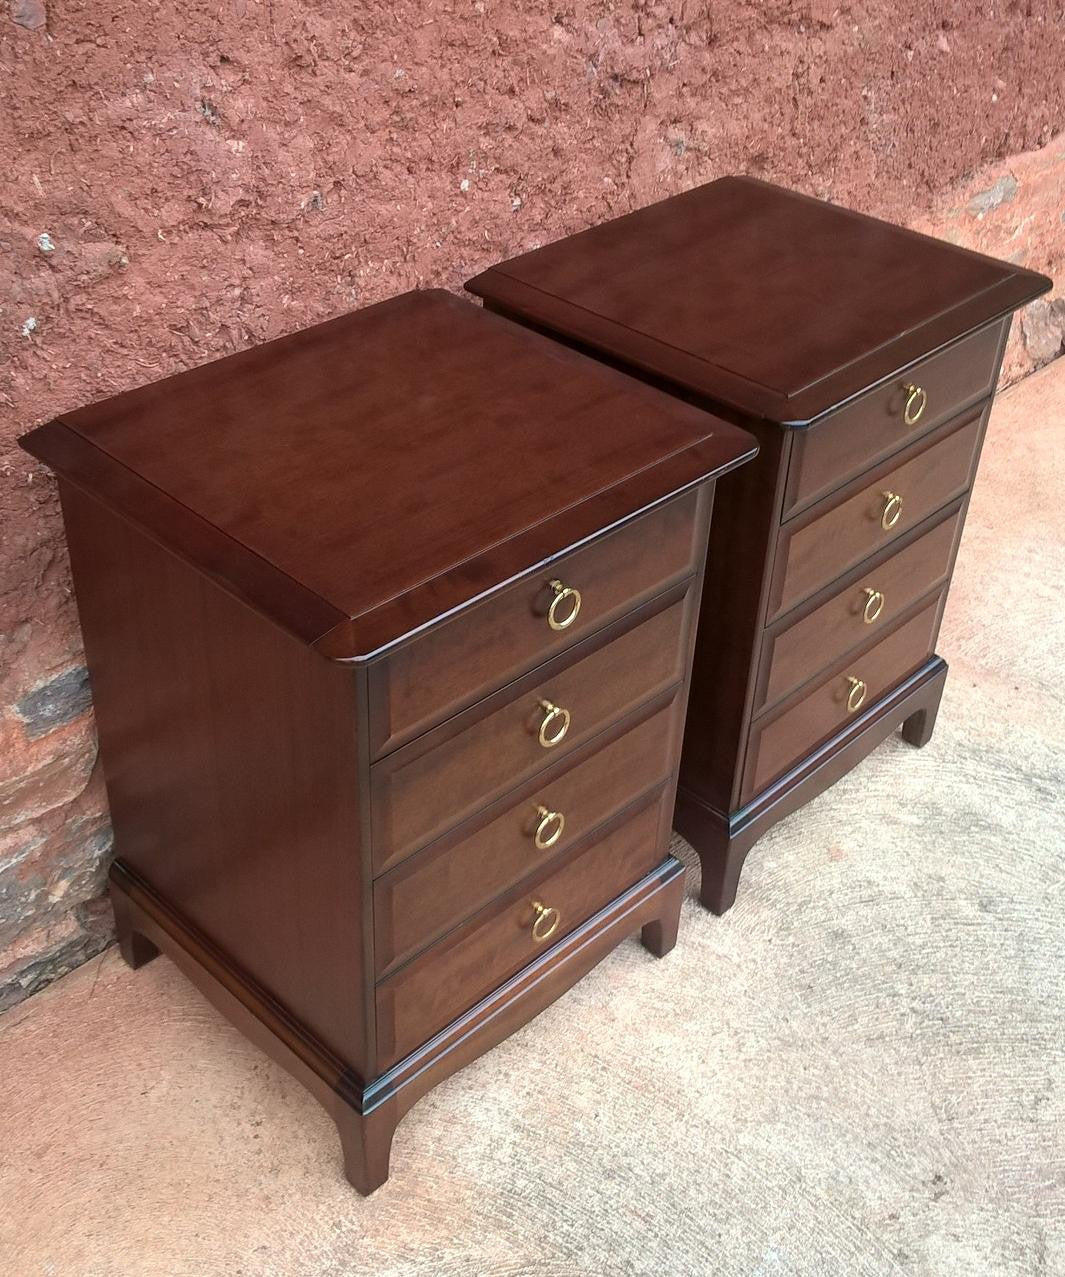 A Pair Of Vintage "Stag Minstrel" Bedside Chests